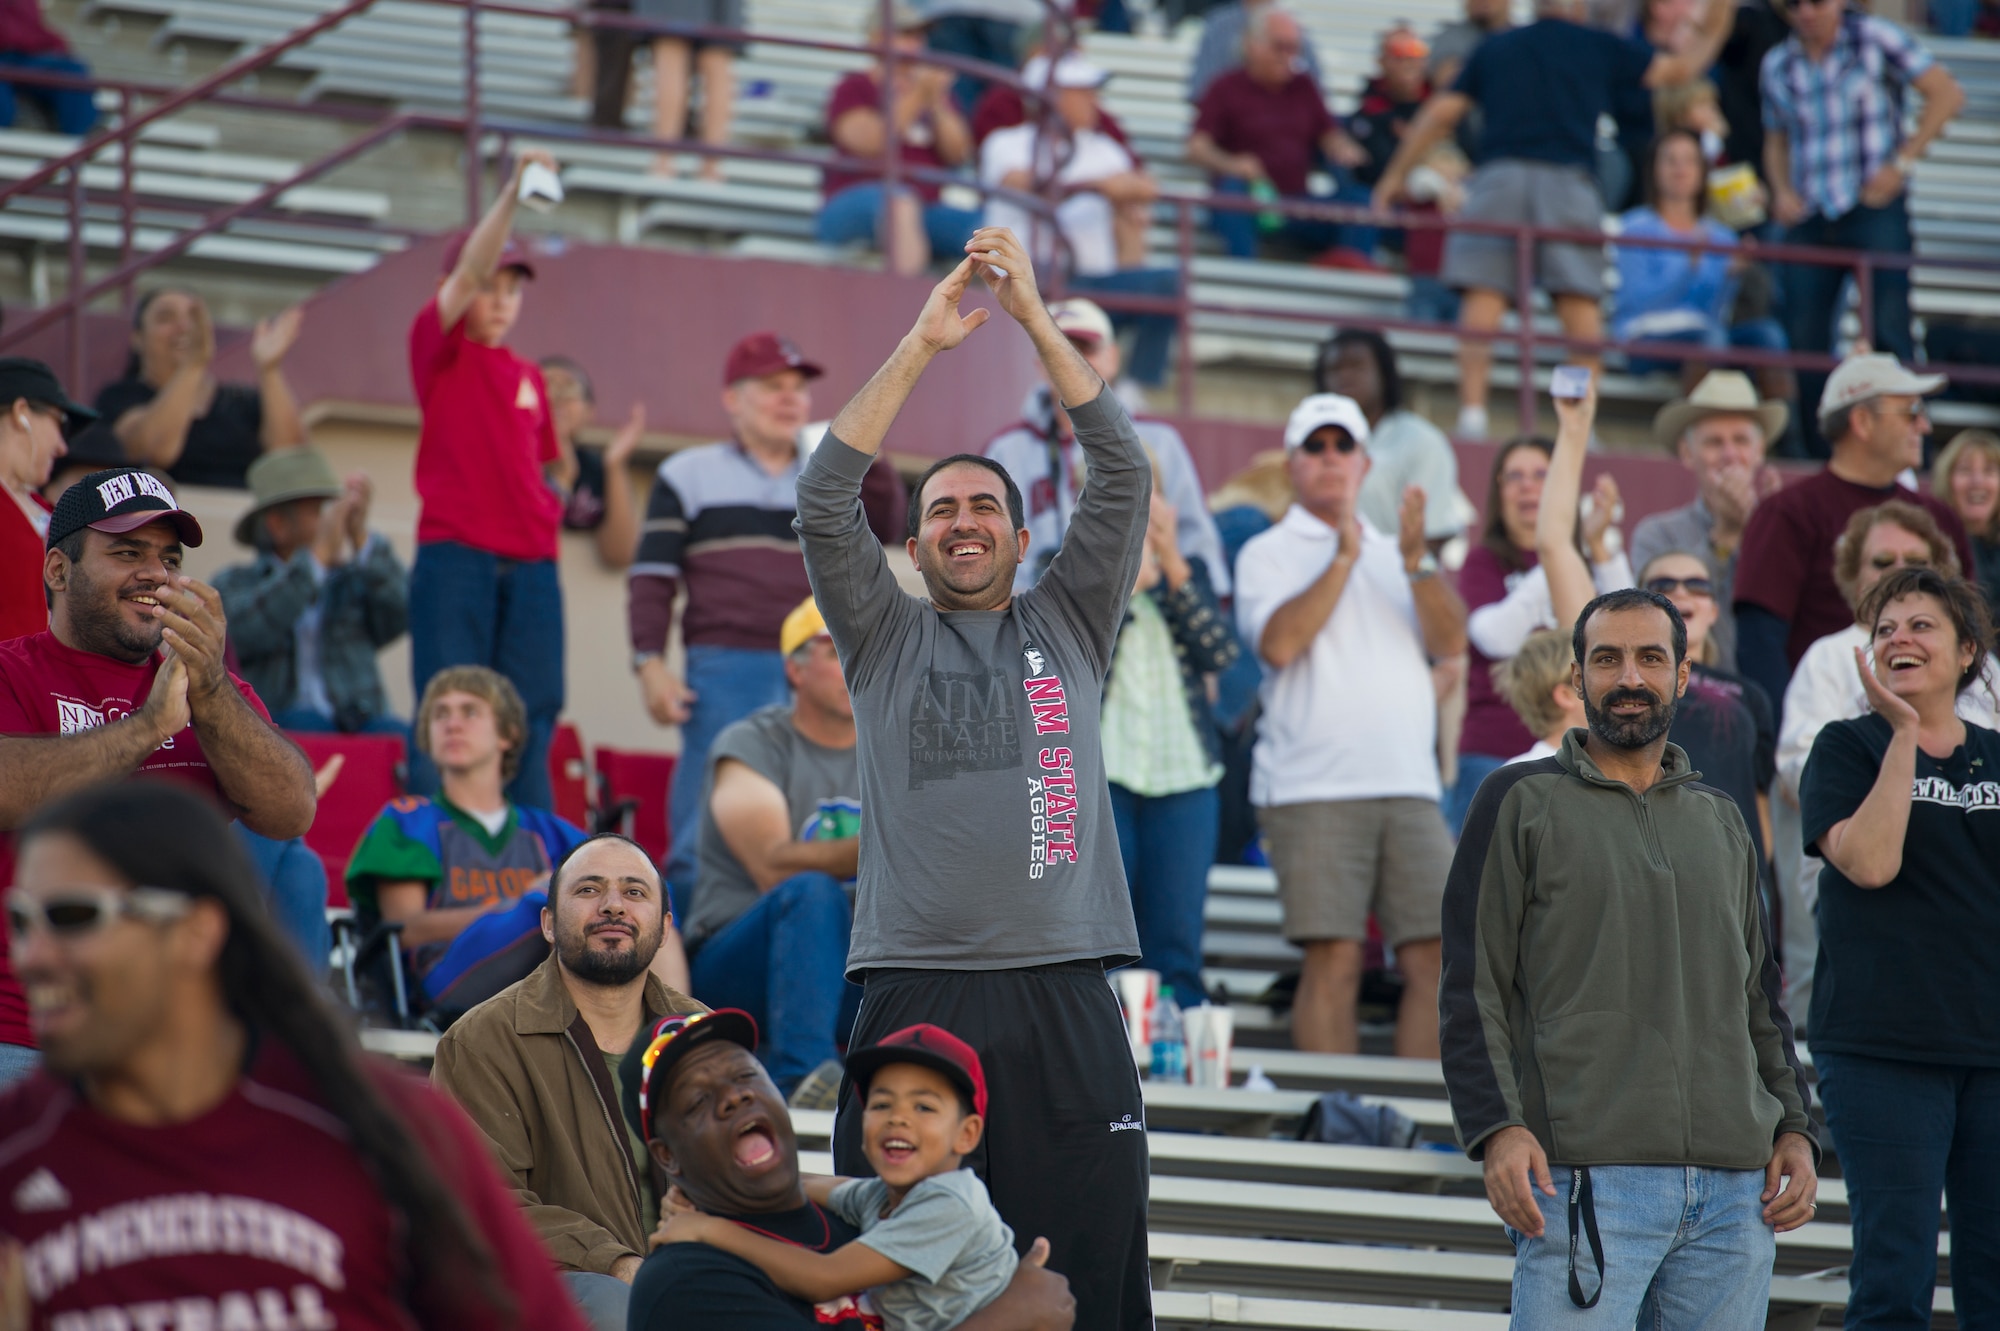 New Mexico State University football fans celebrate an Aggie touchdown at Aggie Memorial Stadium in Las Cruces, N.M., Nov. 9. NMSU hosted Boston College for their annual military appreciation game, which honored current and past military veterans. (U.S. Air Force photo by Airman 1st Class Aaron Montoya/Released)